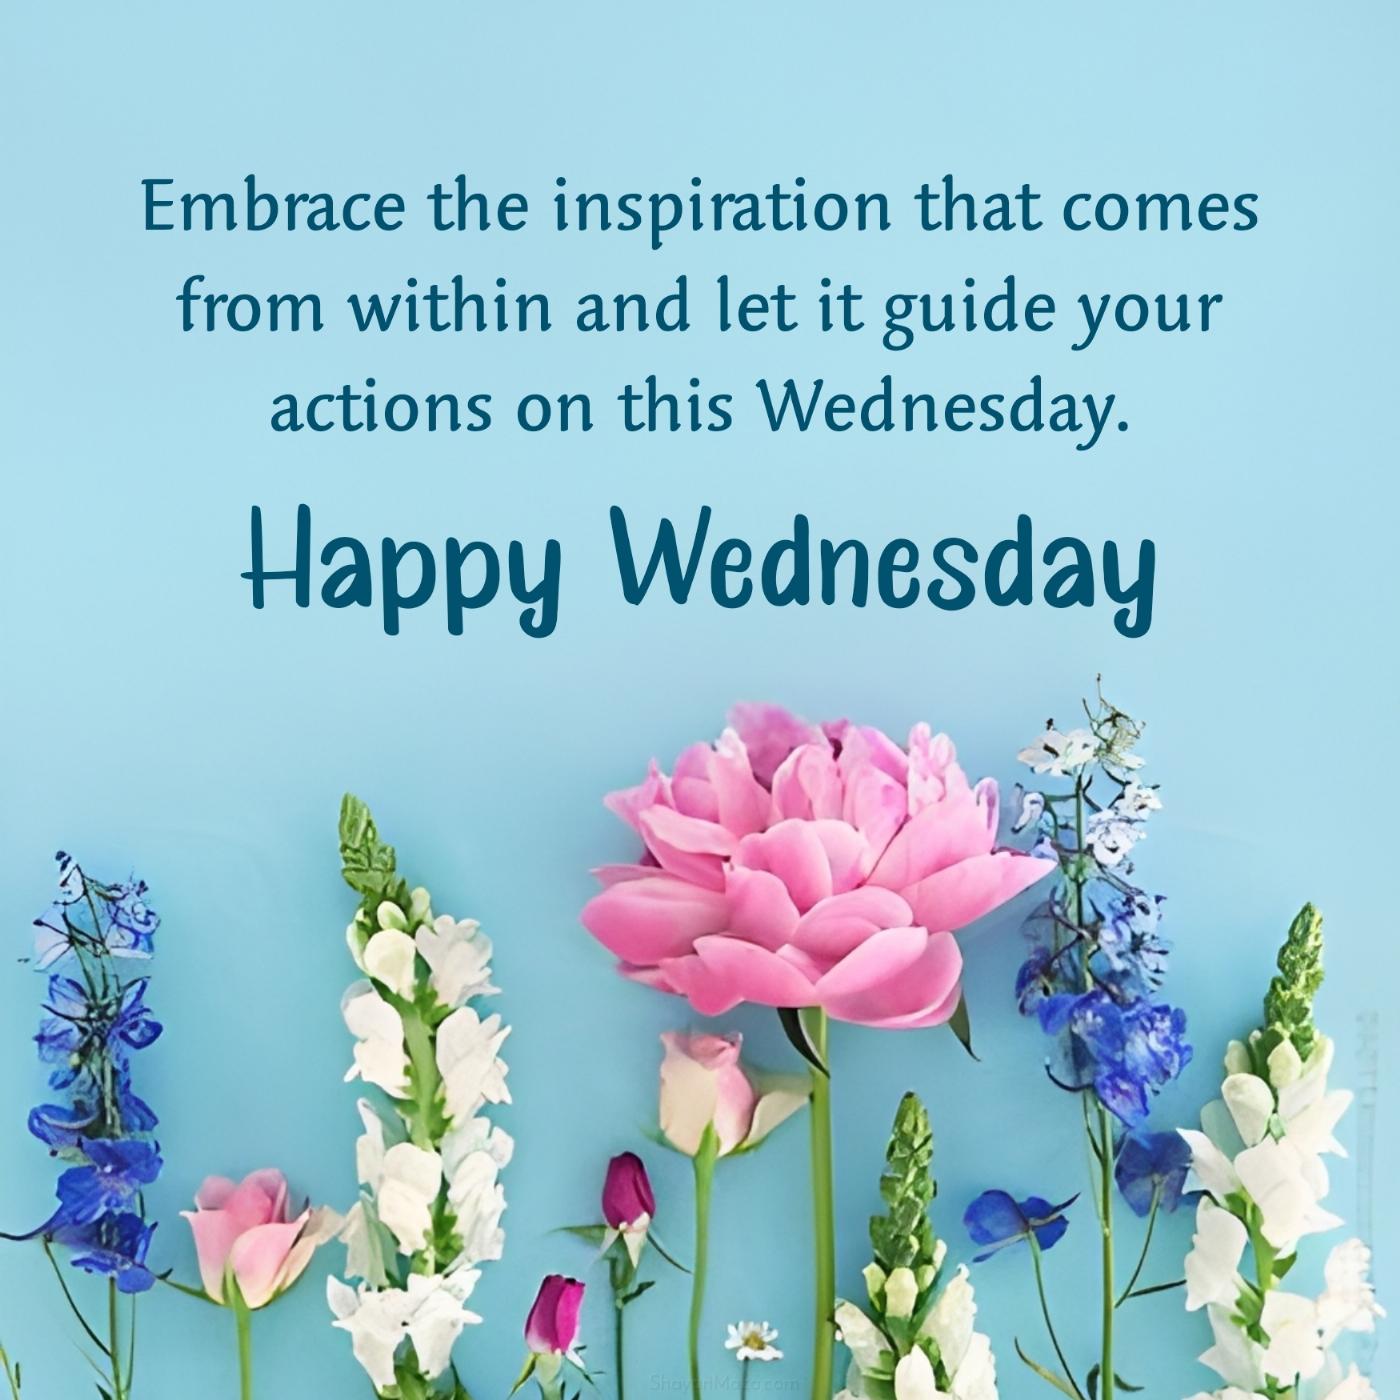 Embrace the inspiration that comes from within and let it guide your actions on this Wednesday